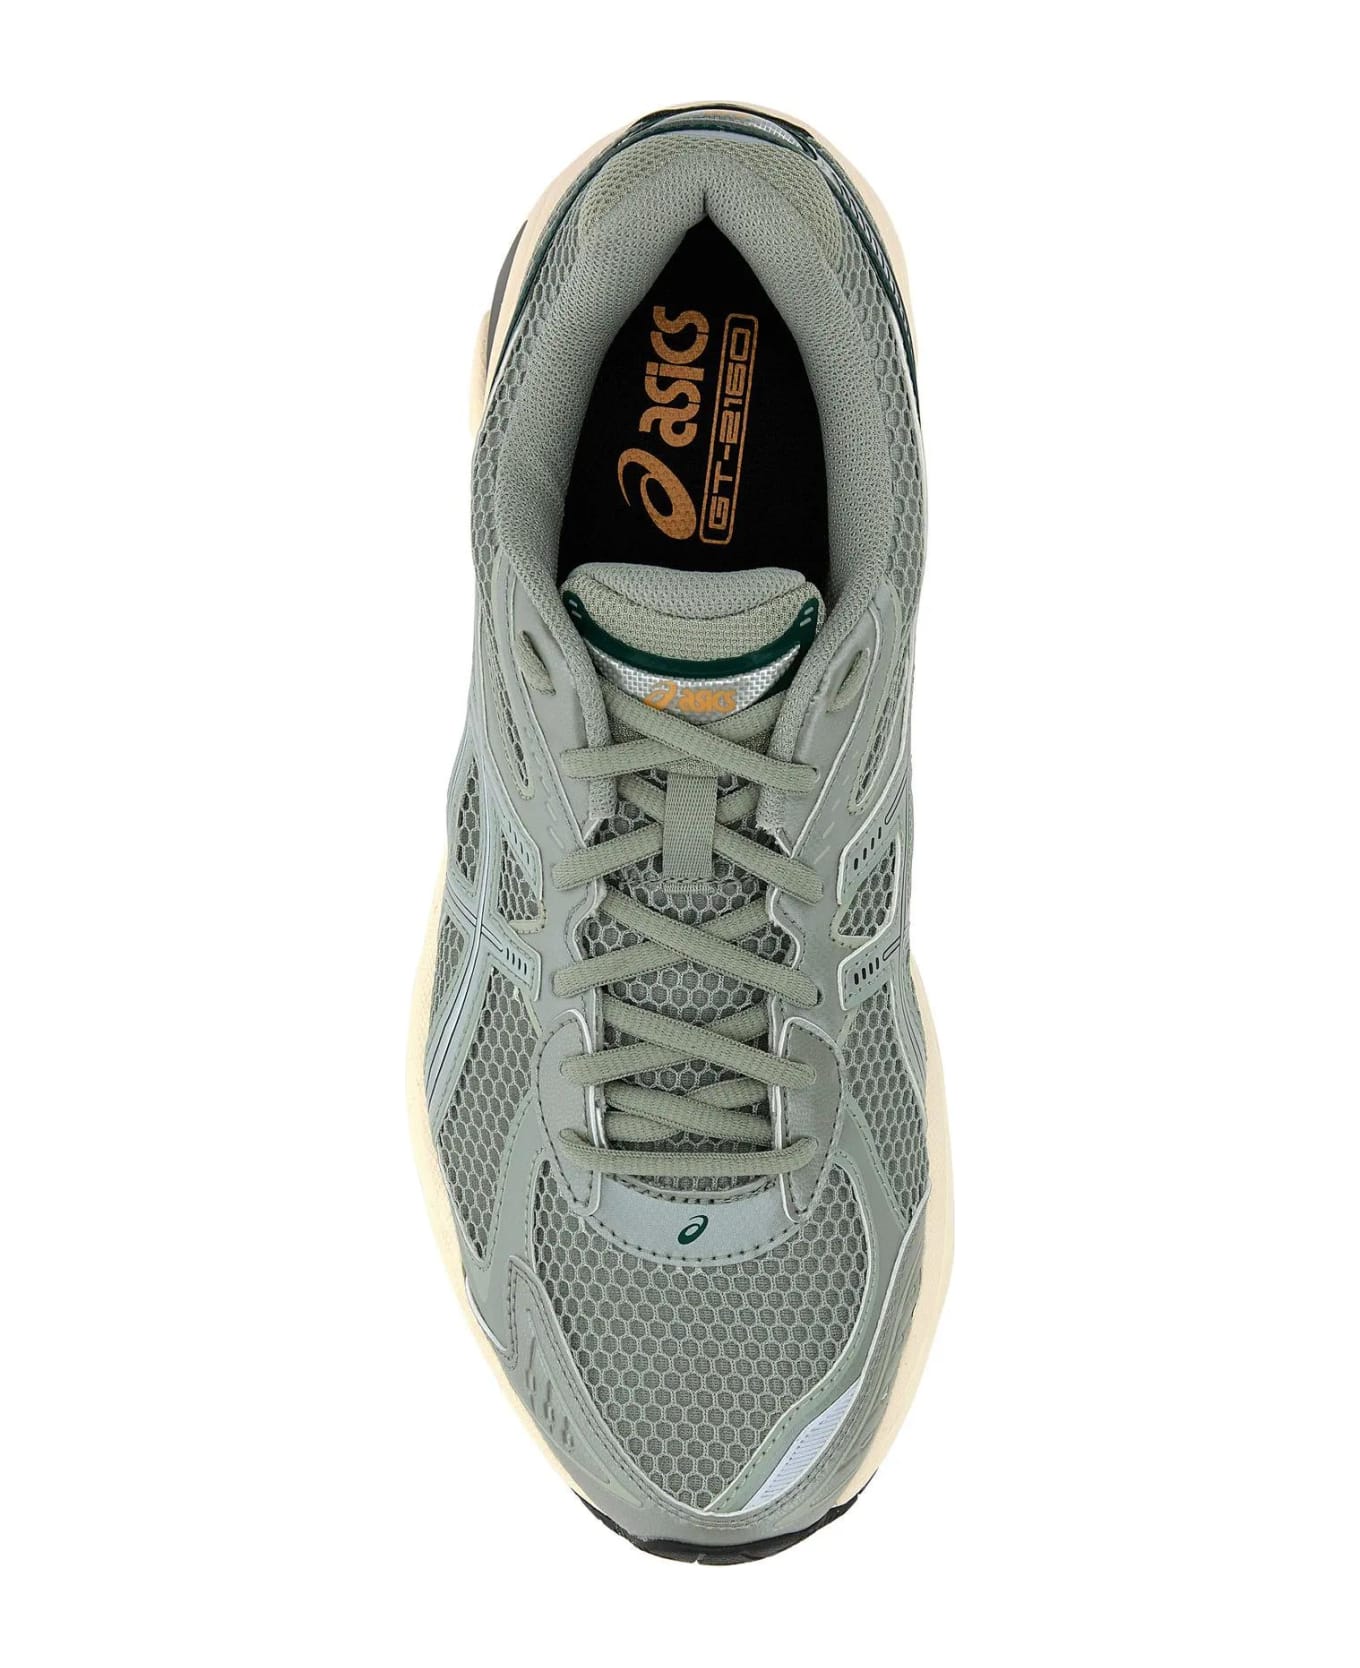 Asics Multicolor Mesh And Synthetic Leather Gt-2160 Sneakers - Seal Grey/jewel Green